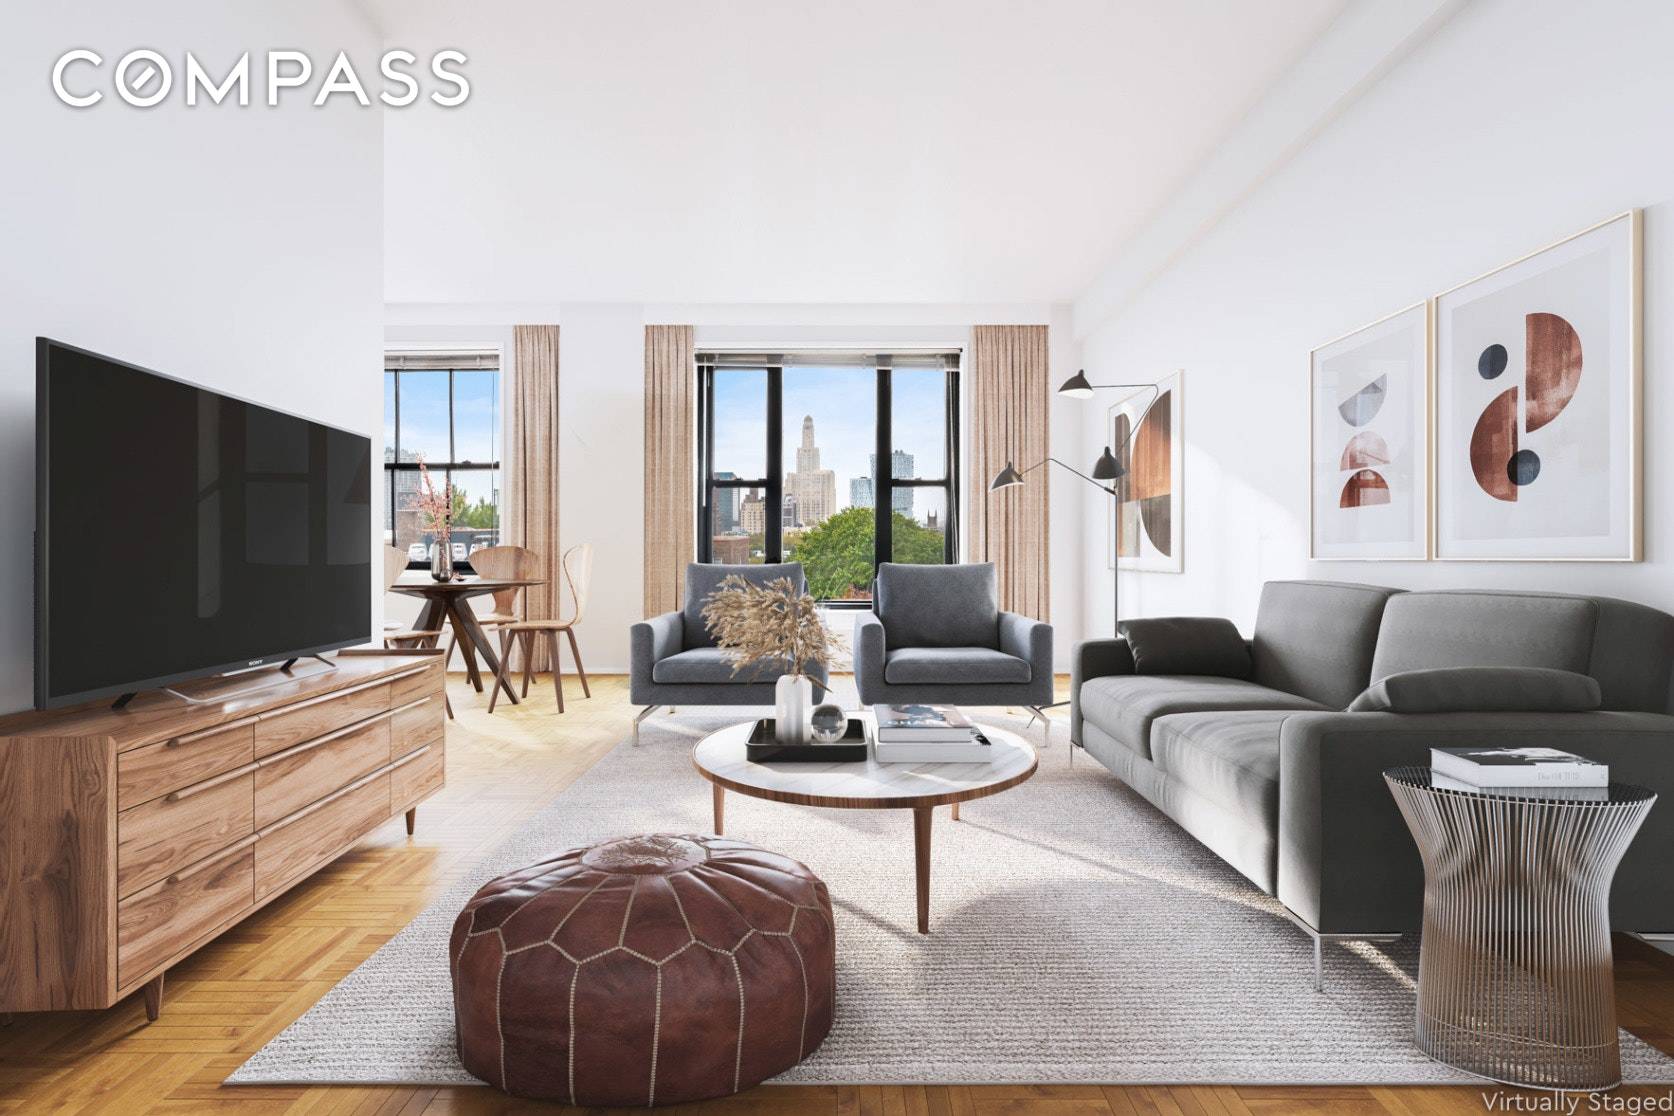 Opportunity knocks in this high floor one bedroom apartment with outrageous views of Brooklyn, Manhattan and beyond.